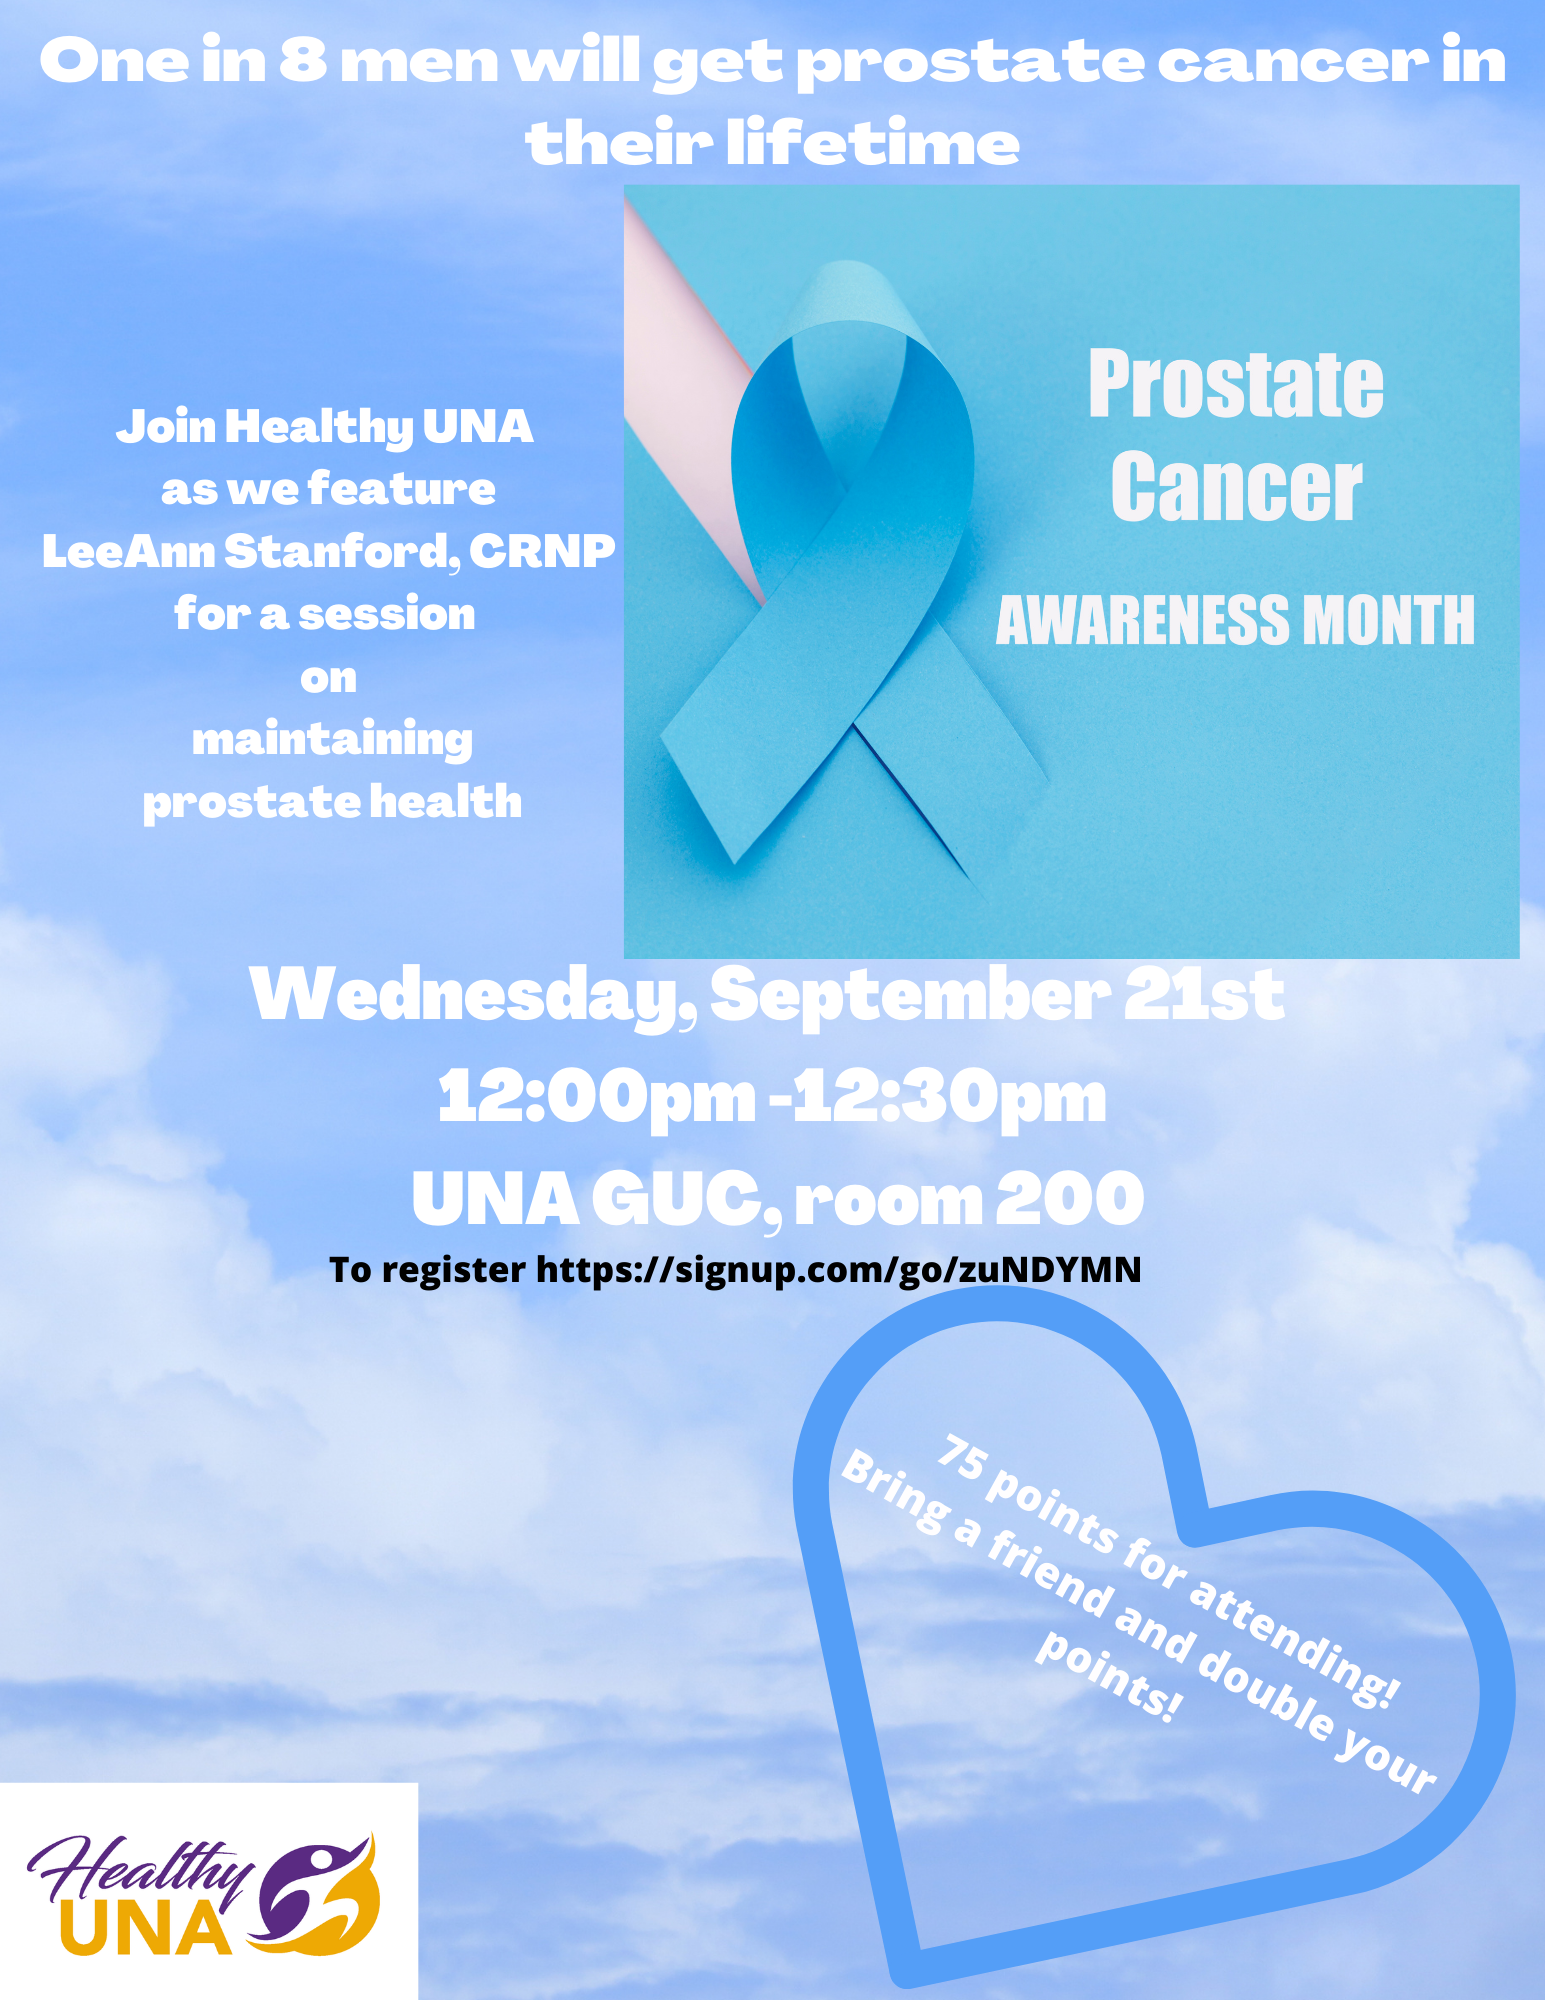 september-is-national-prostate-cancer-awareness-month.-looking-for-ways-to-support-prostate-cancer-awareness-and-research-here-are-some-ways-you-can-support-prostate-cancer-awareness-month-all-year-long.-3.png